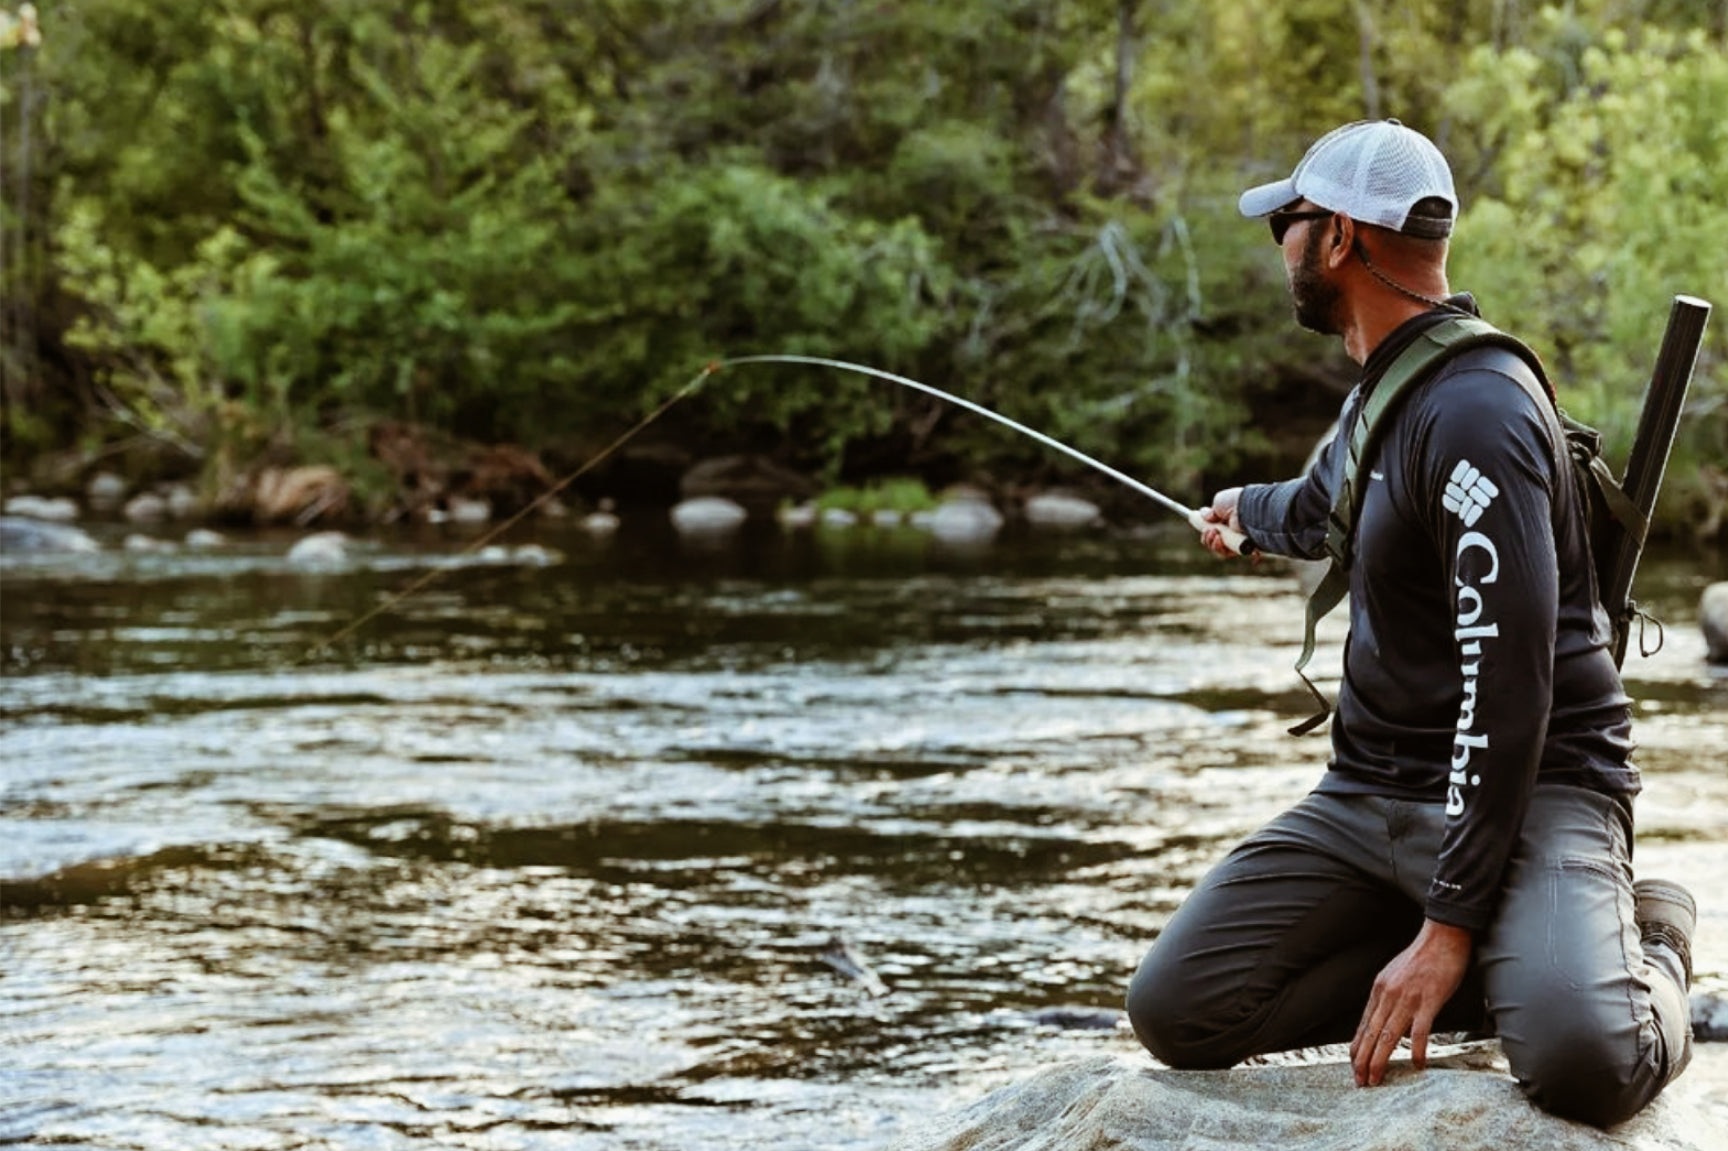 Practice Fly Rods & Tenkara – Out Fly Fishing